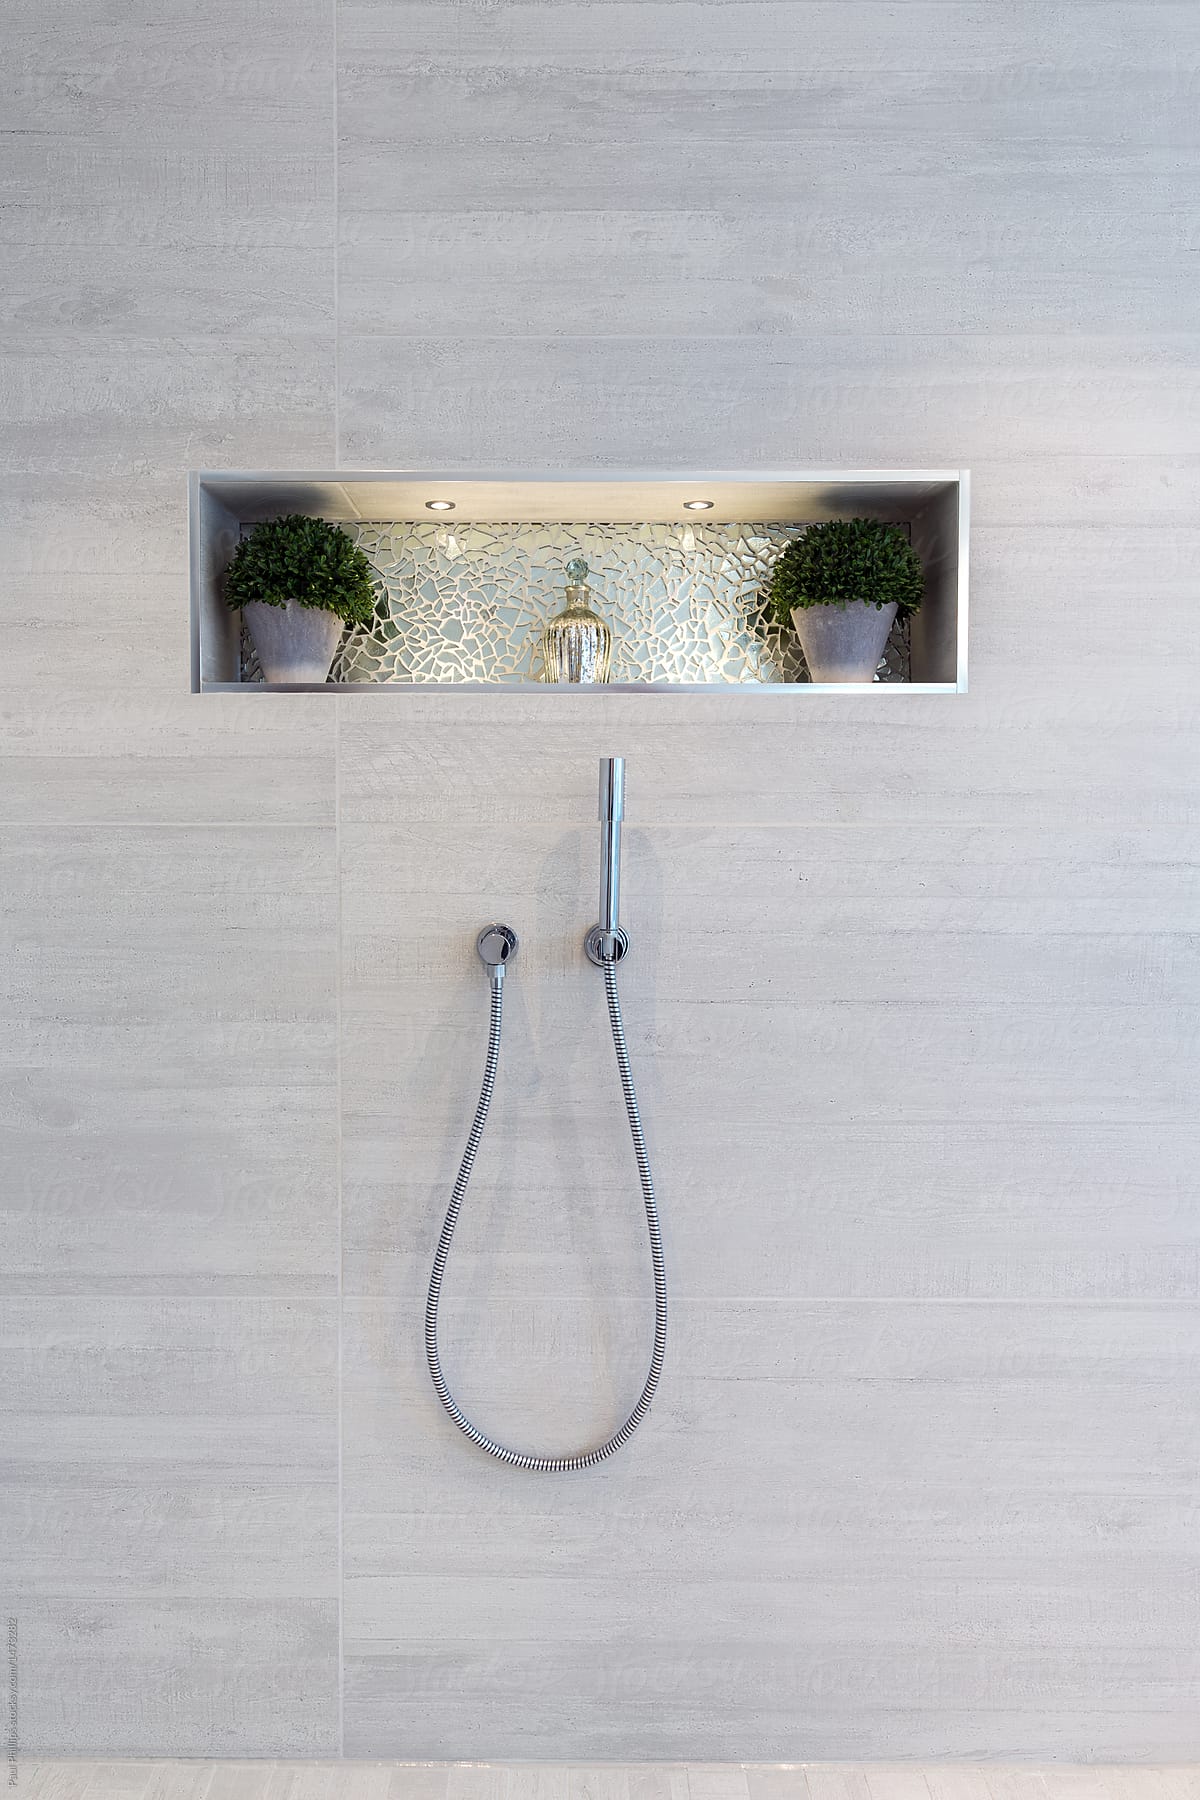 Inset shelf and shower head in a contemporary wet room.